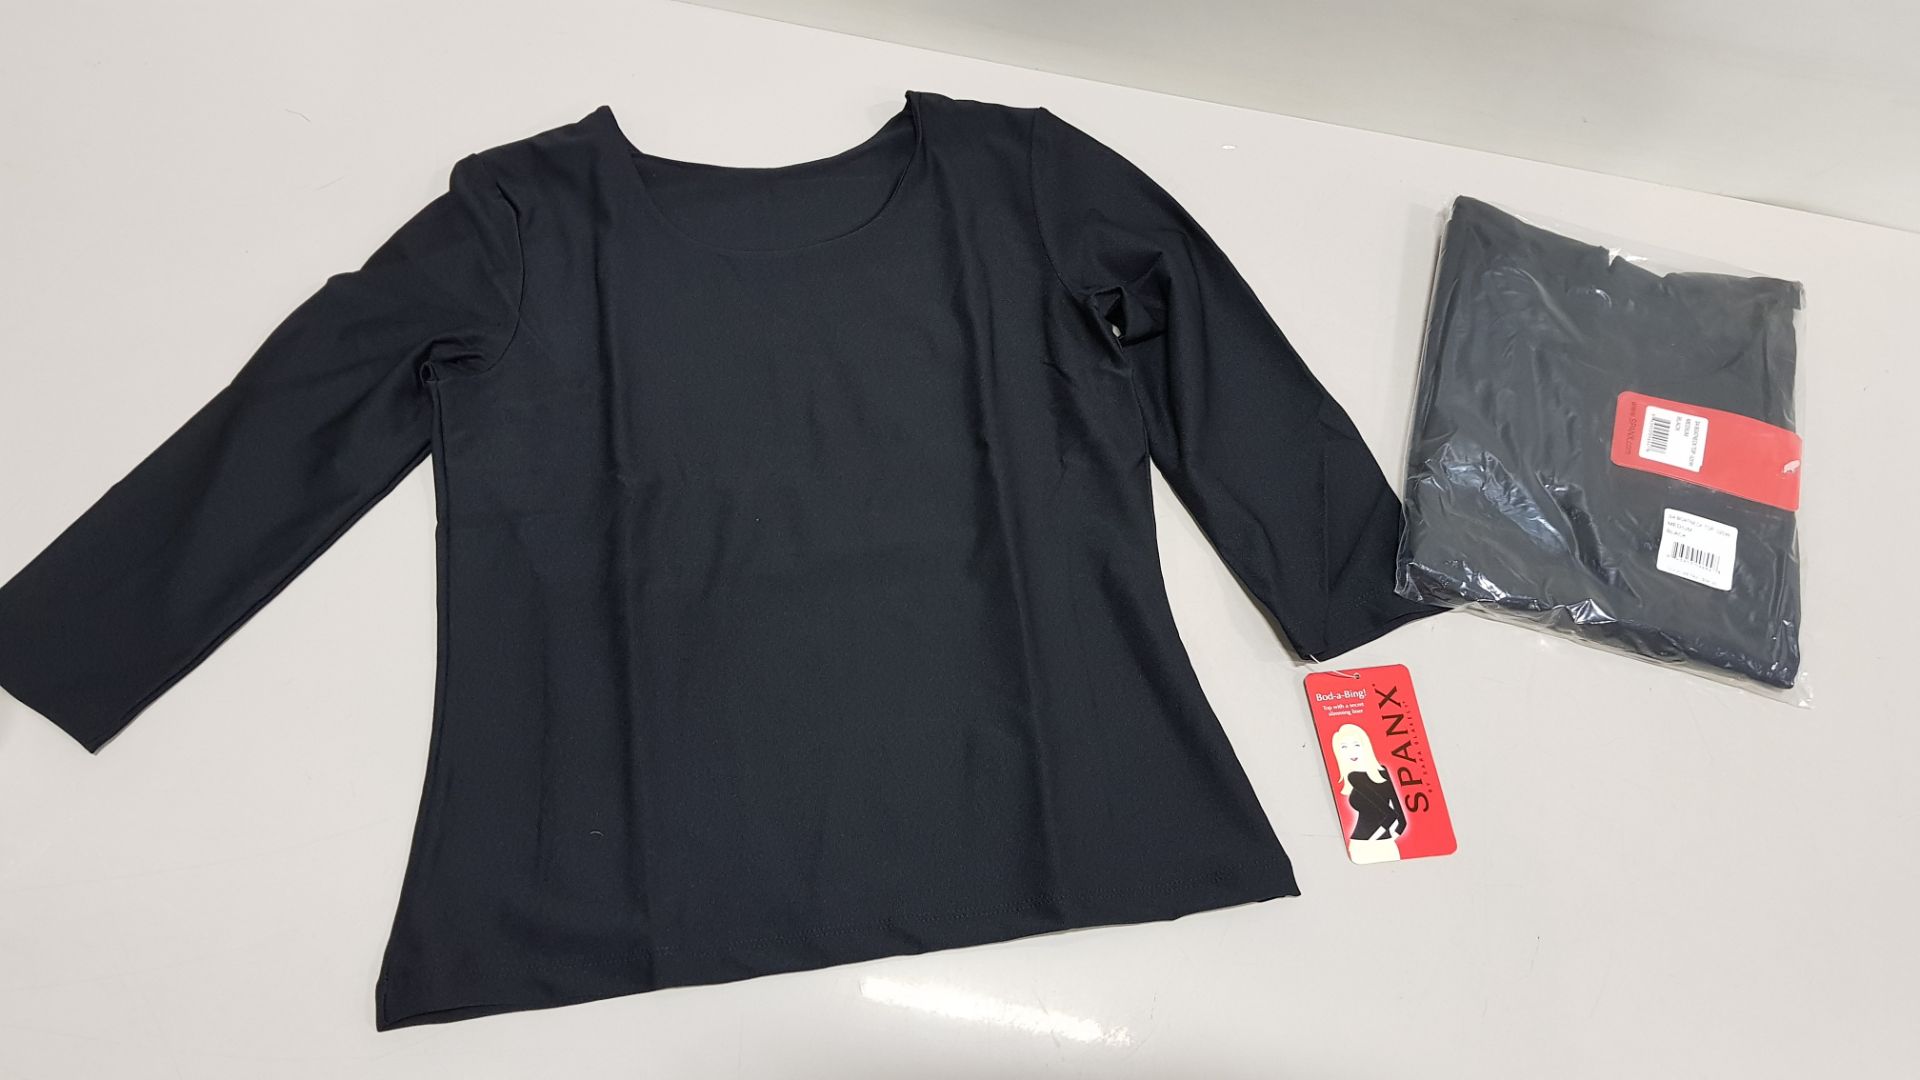 20 X BRAND NEW SPANX THREE QUARTER BOAT NECK TOP IN BLACK, SIZE SMALL RRP $58.00 (TOTAL RRP $1168.